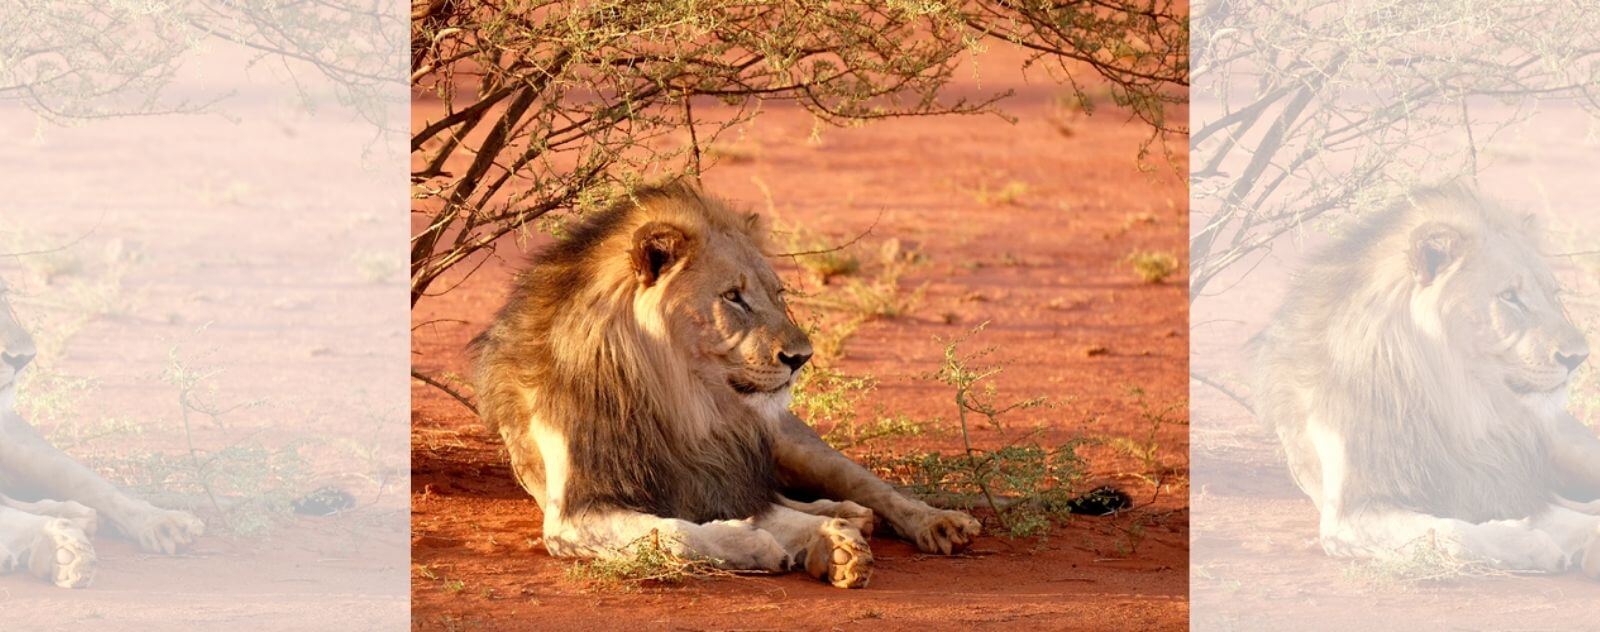 Hot Lion under a Tree and on Hot Red Earth